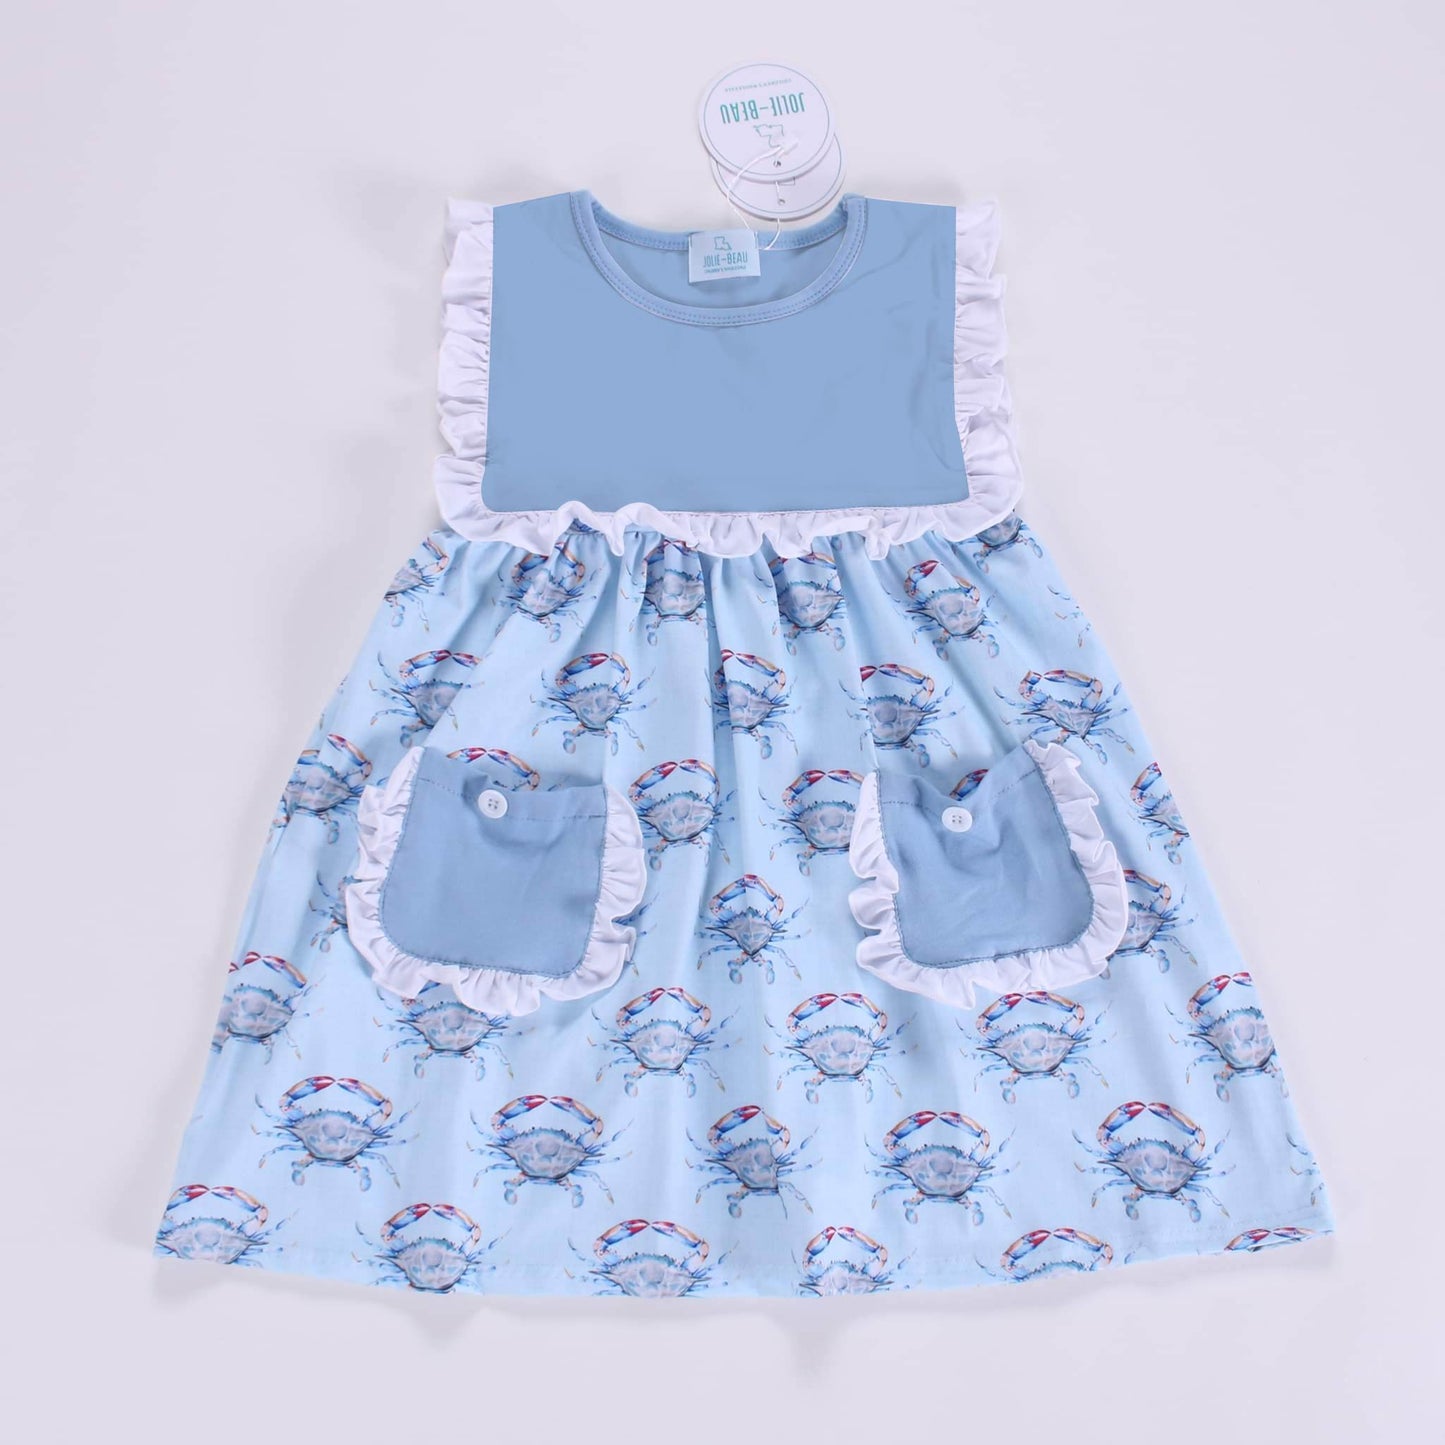 Blue Linen Crab Dress for Girls with Blue top